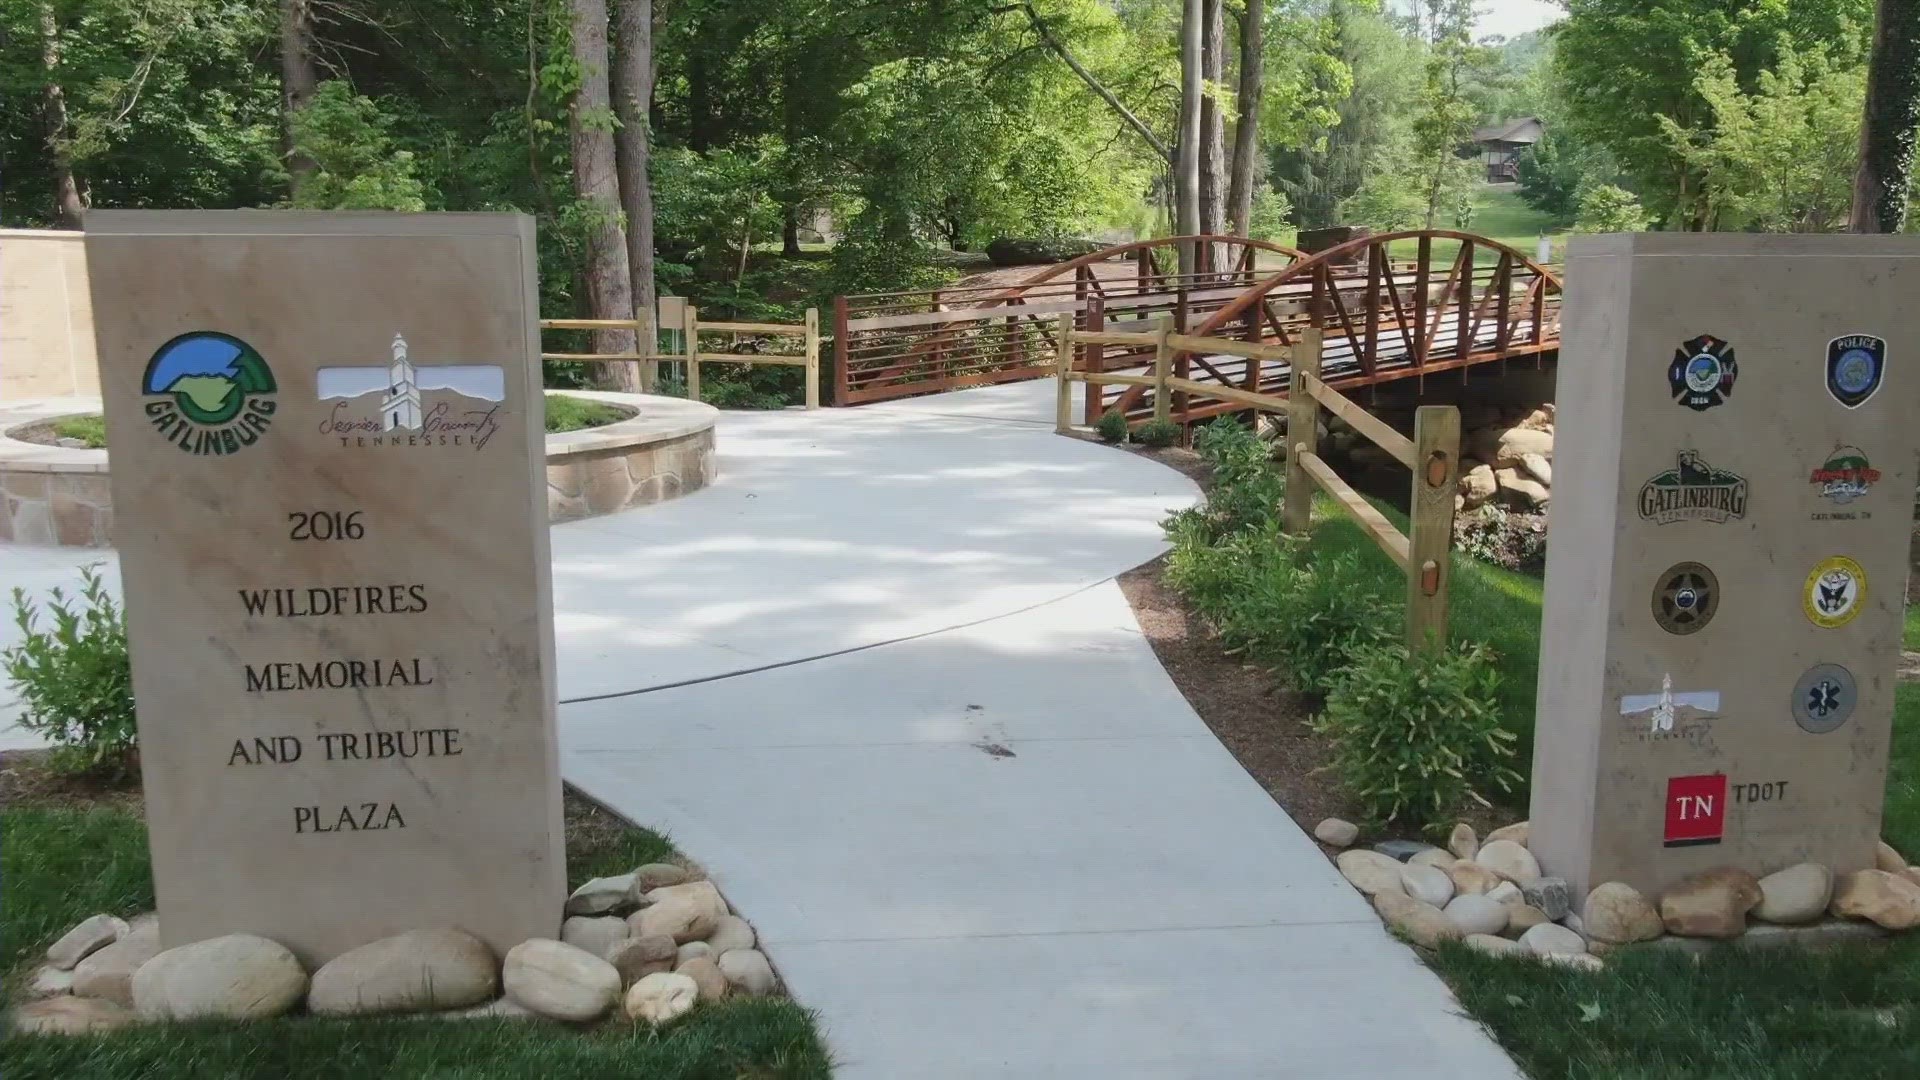 A local engineer explains the design of the memorial plaza for the 14 lives that were lost in the 2016 Gatlinburg wildfire and the first responders.